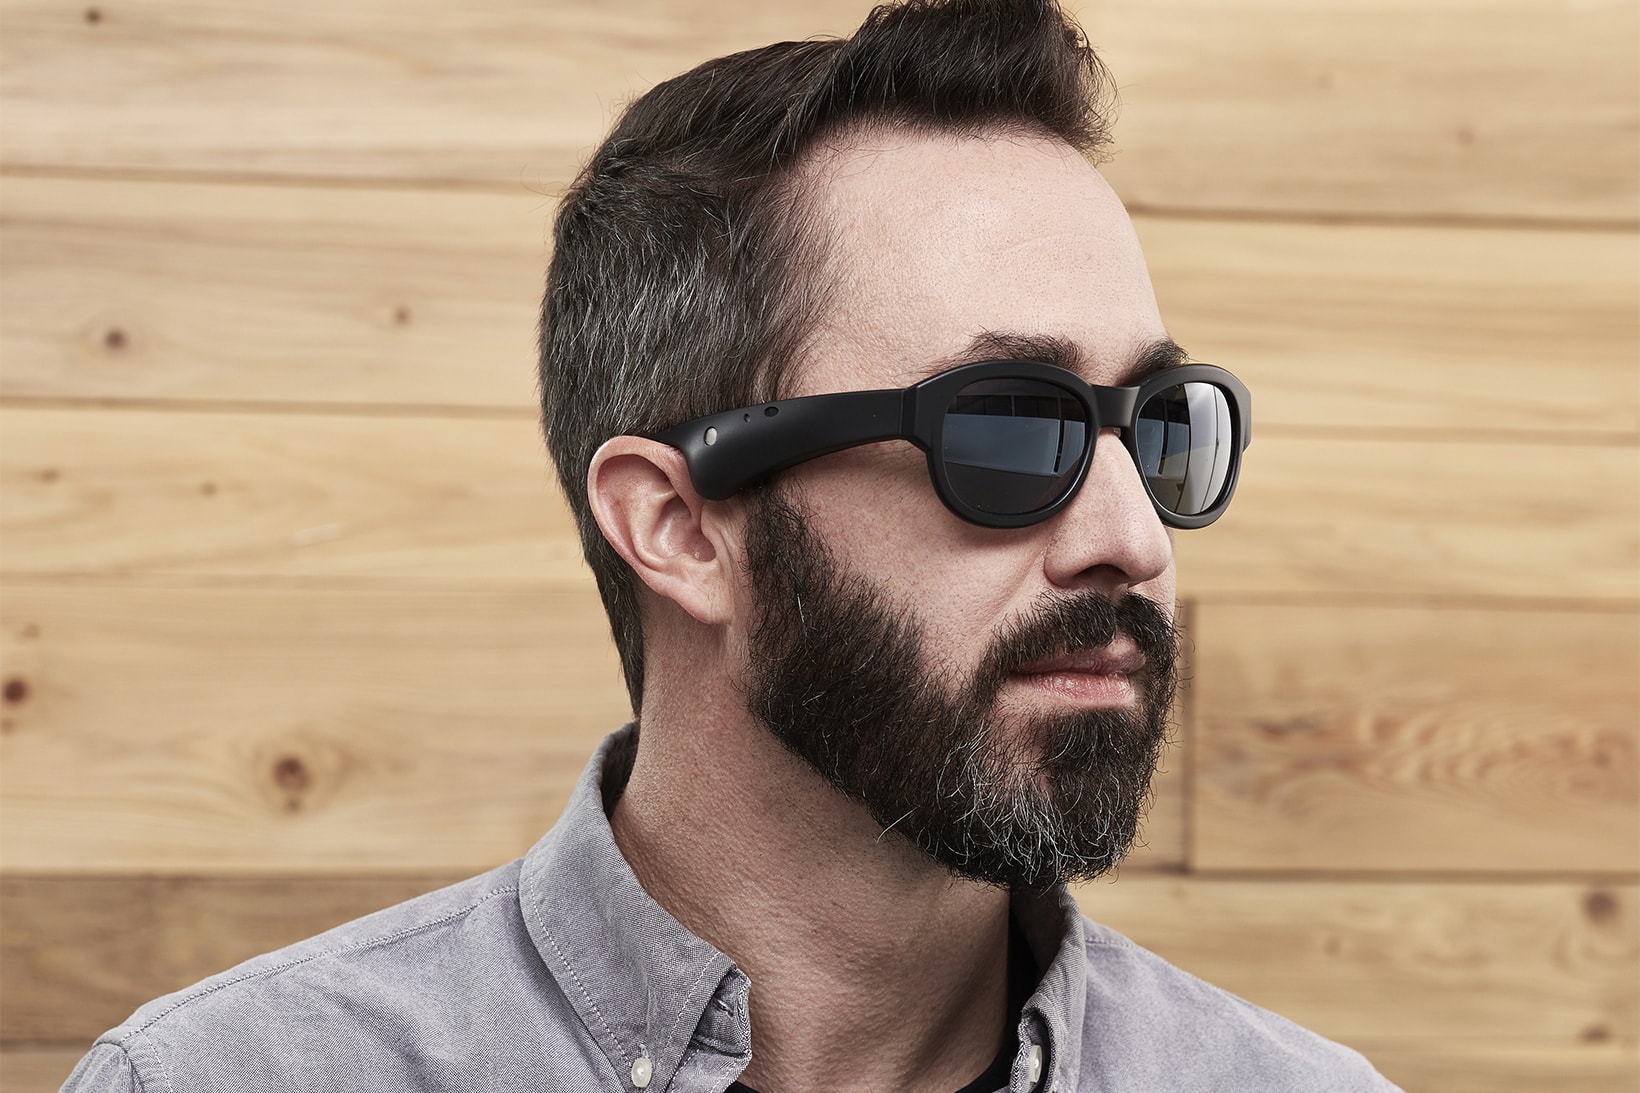 Bose Audio Augmented Reality AR Glasses SXSW summer 2018 develop GPS